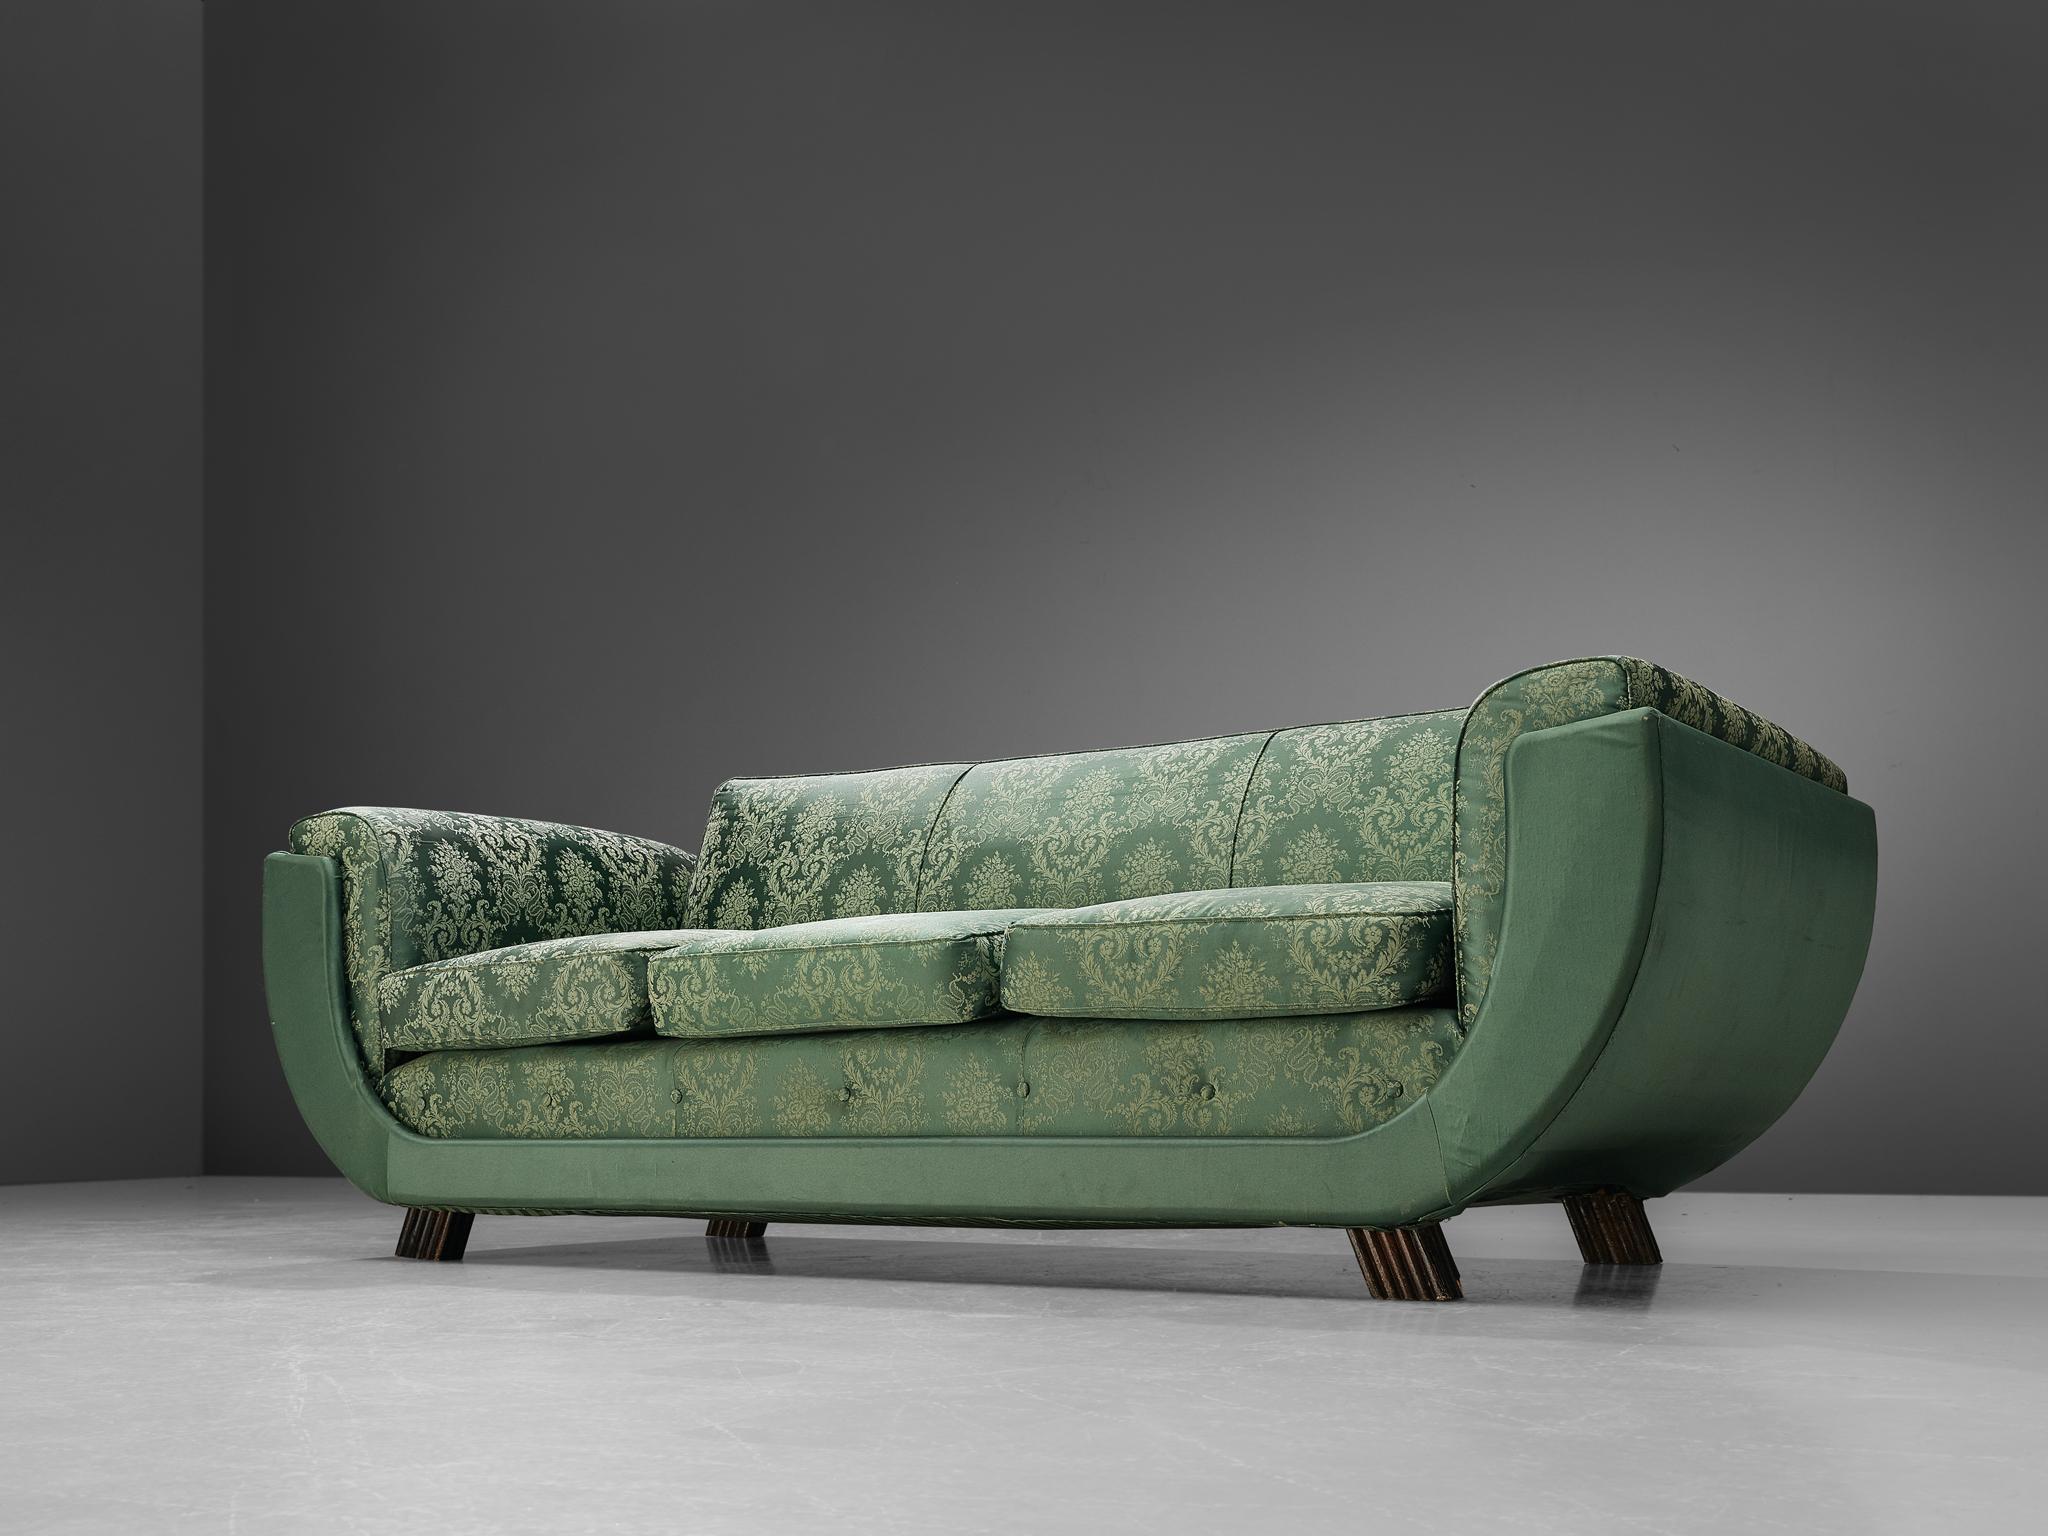 Three seat sofa, floral patterned green upholstery, Italy, 1940s

Italian three-seat sofa with shiny green floral patterned upholstery. The true eyecatcher of this sofa is the gondola-shaped frame which floats upwards into the armrests. The rounded